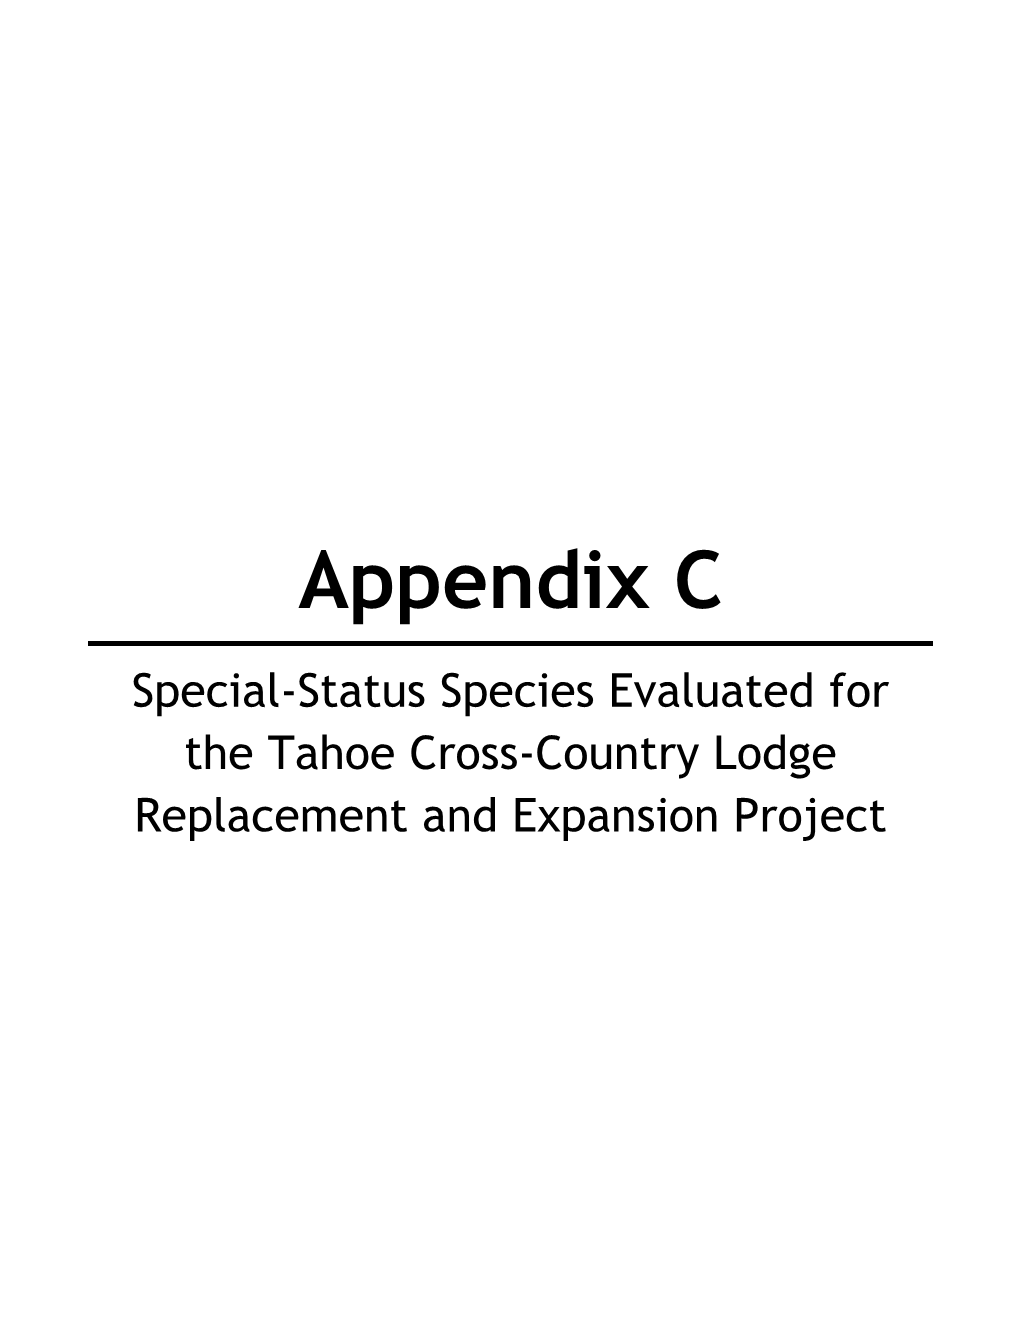 Appendix C Special-Status Species Evaluated for the Tahoe Cross-Country Lodge Replacement and Expansion Project